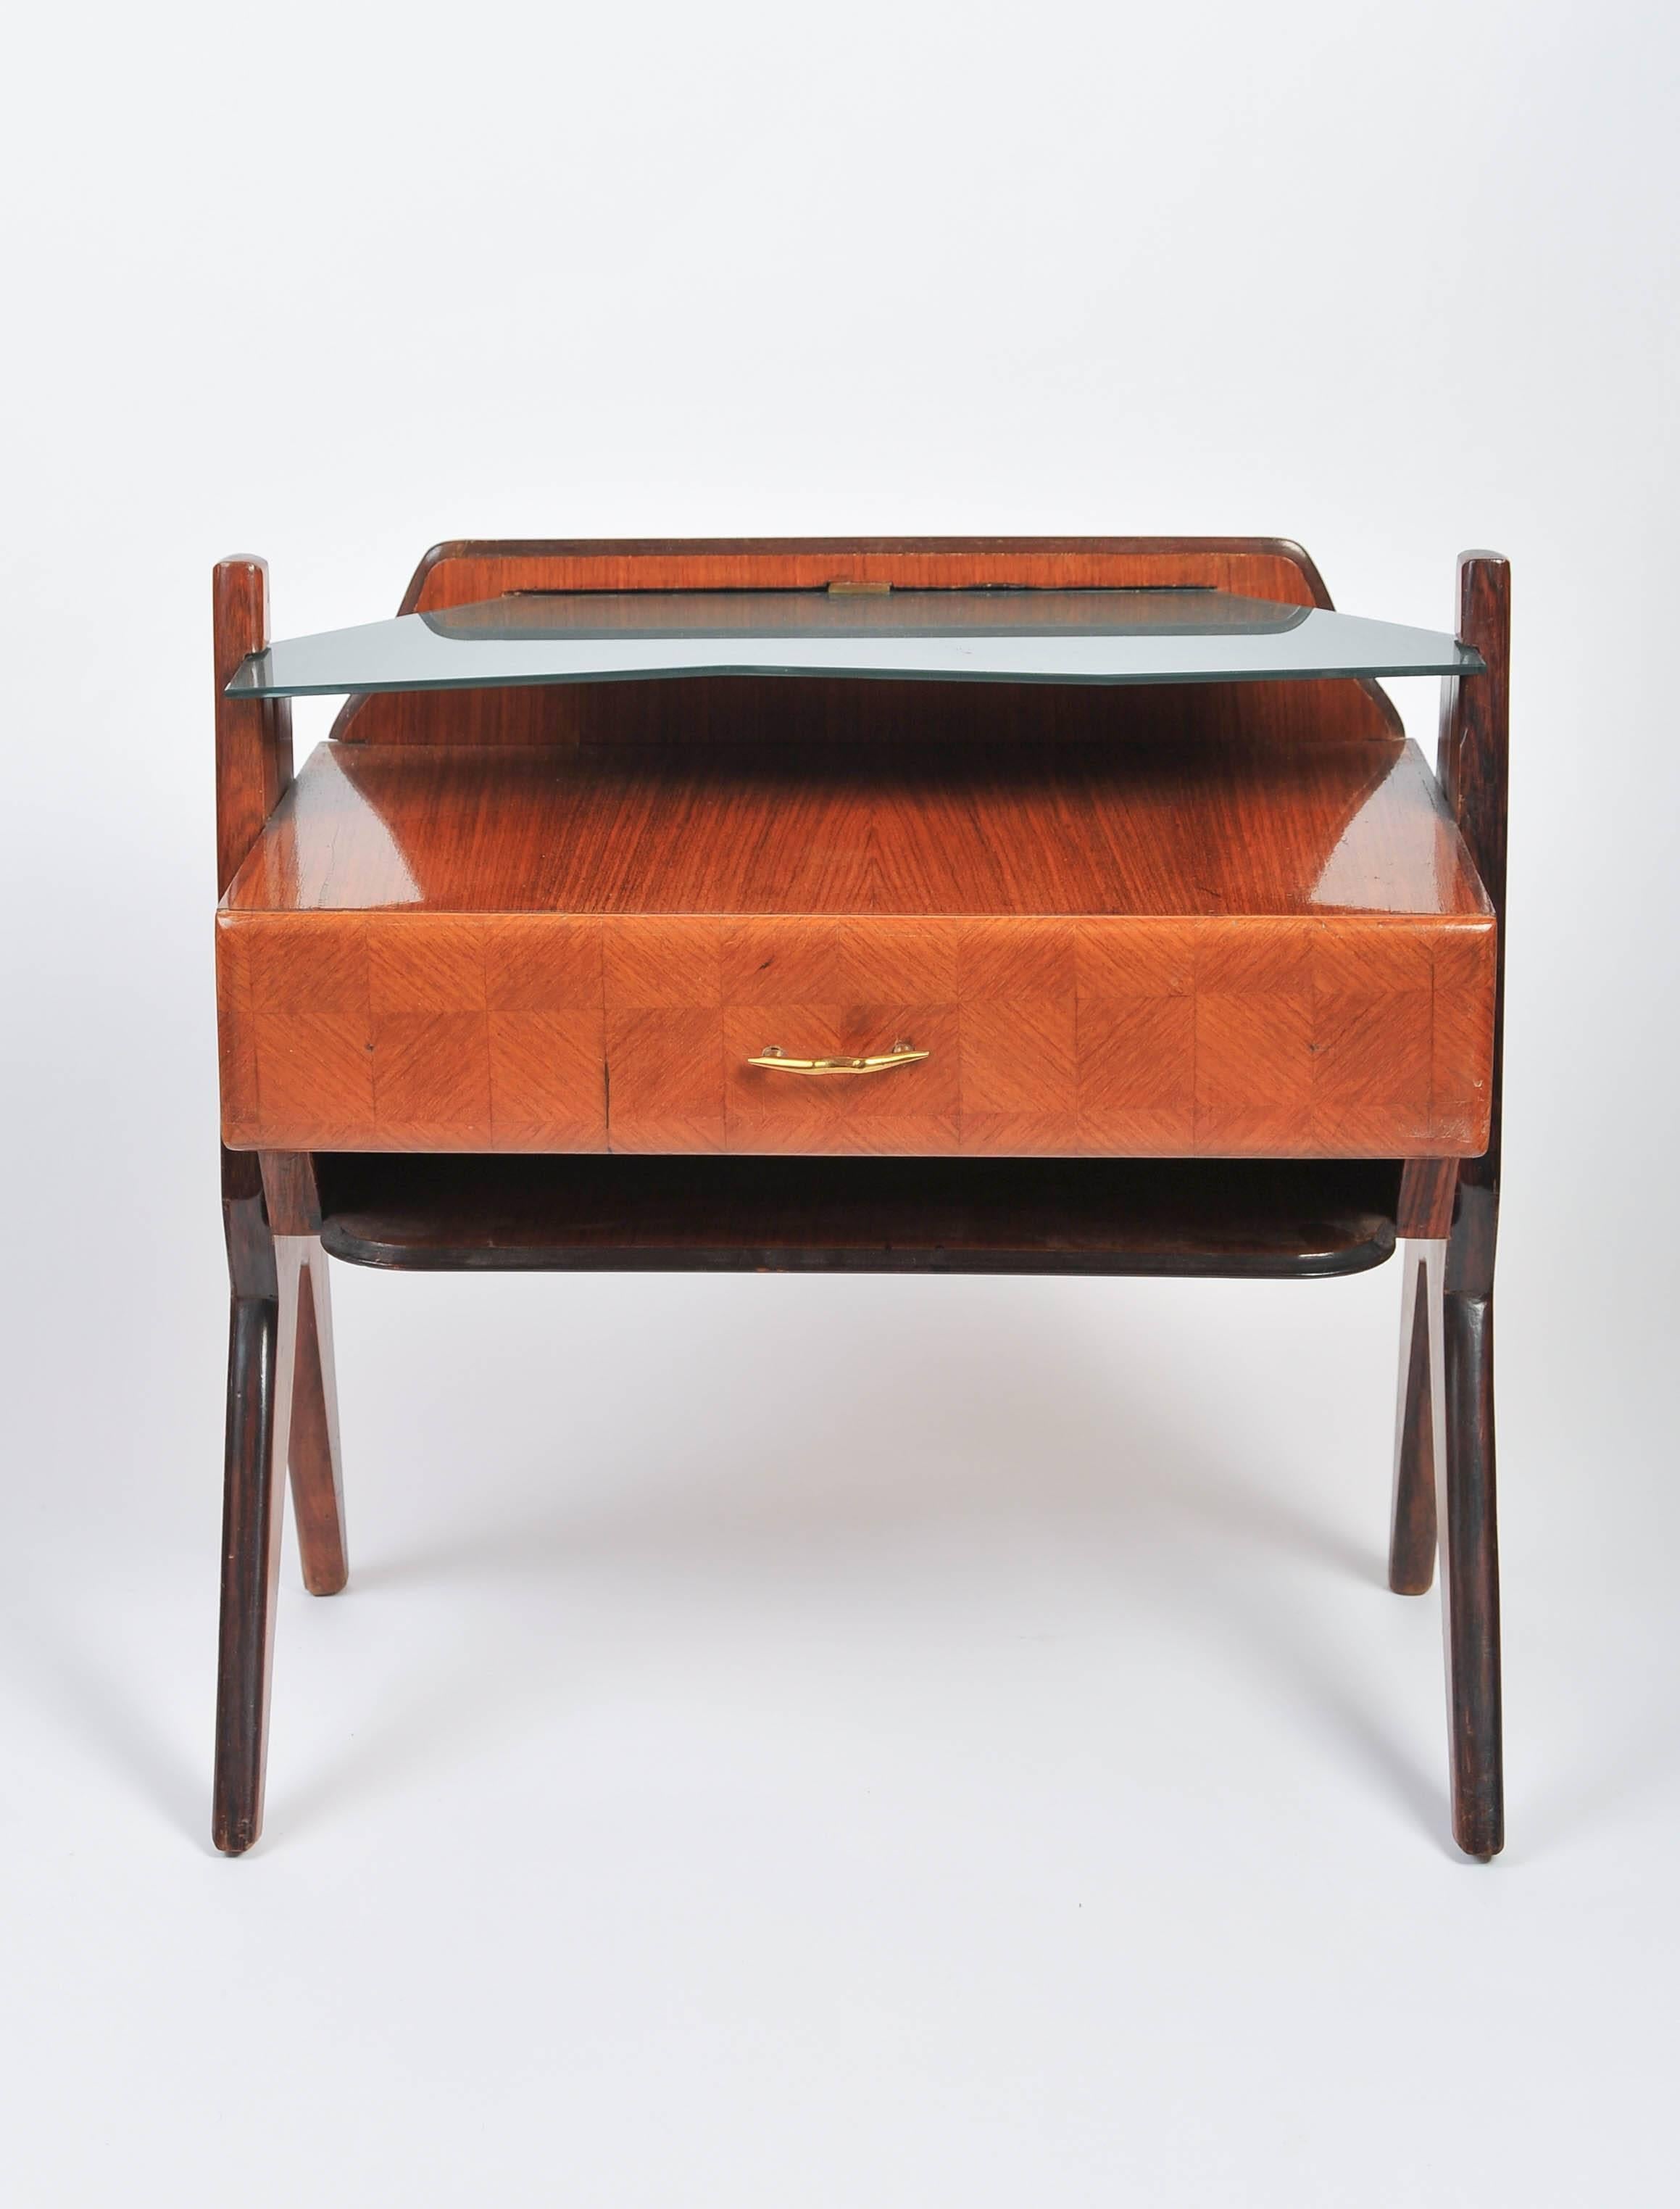 1945-1950 pair of side tables attributed to Vittorio Dassi.